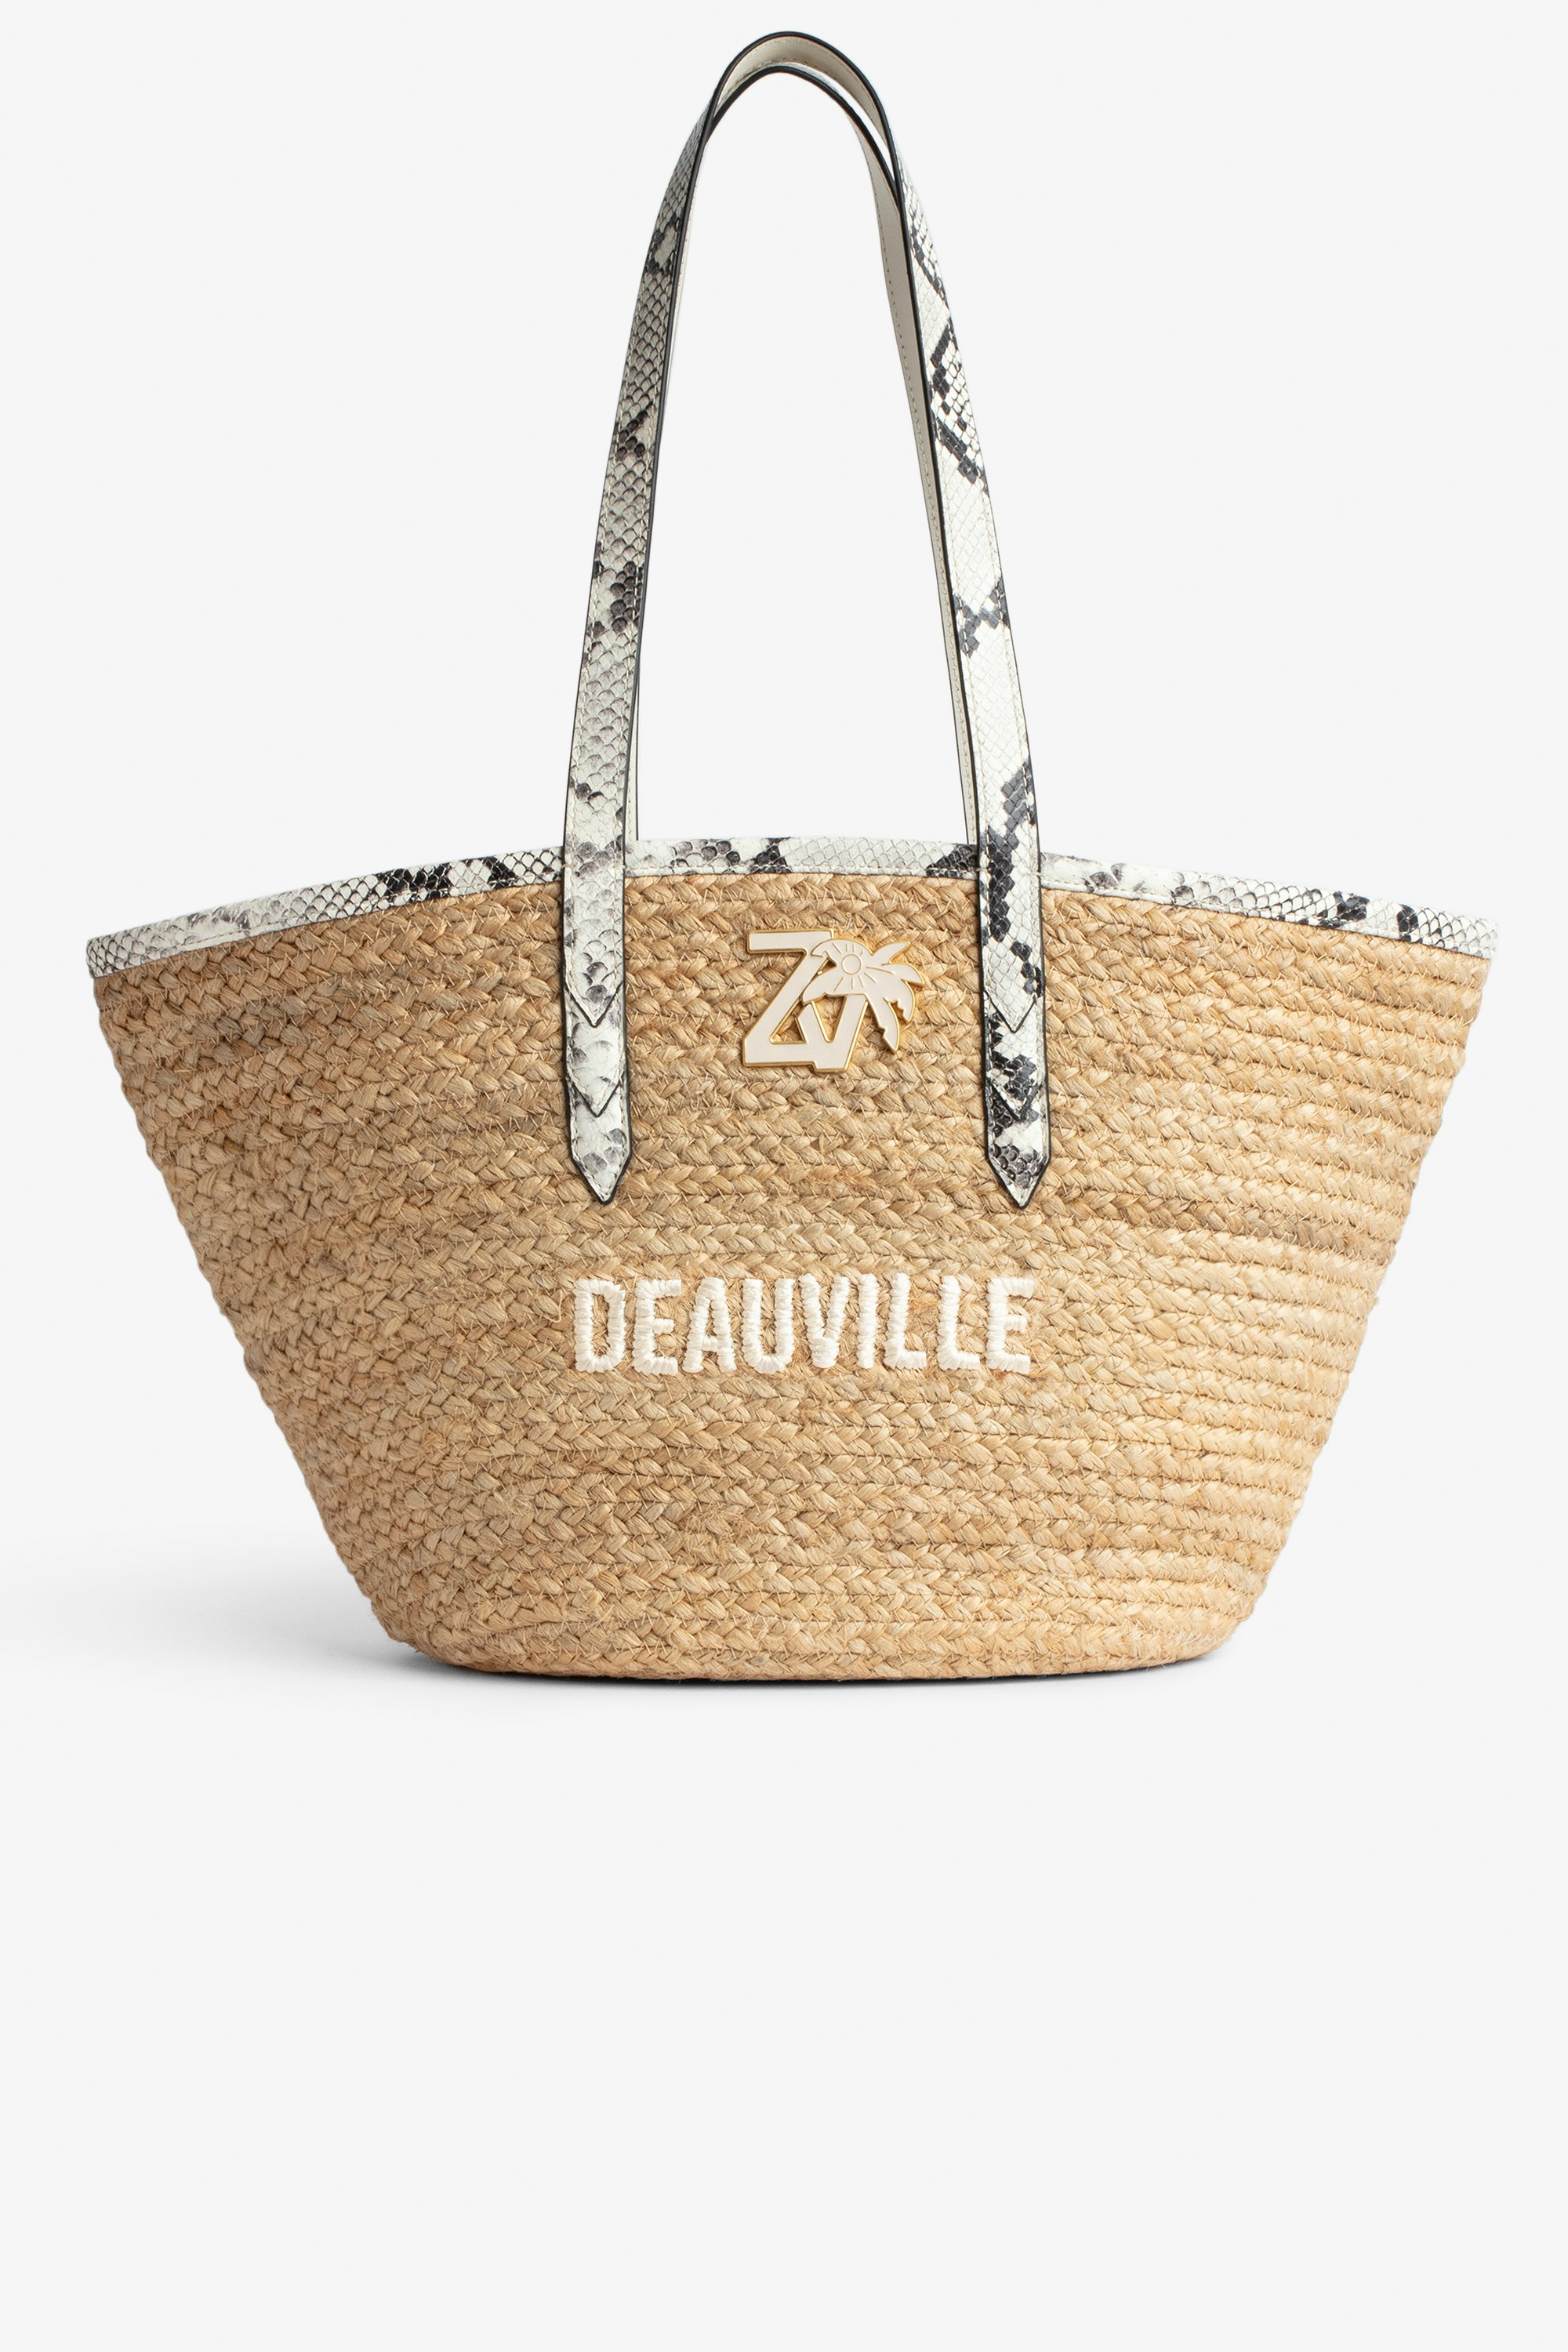 Le Beach Bag - Women's straw bag with off-white snakeskin-effect leather handles, "Deauville" embroidery and ZV charm